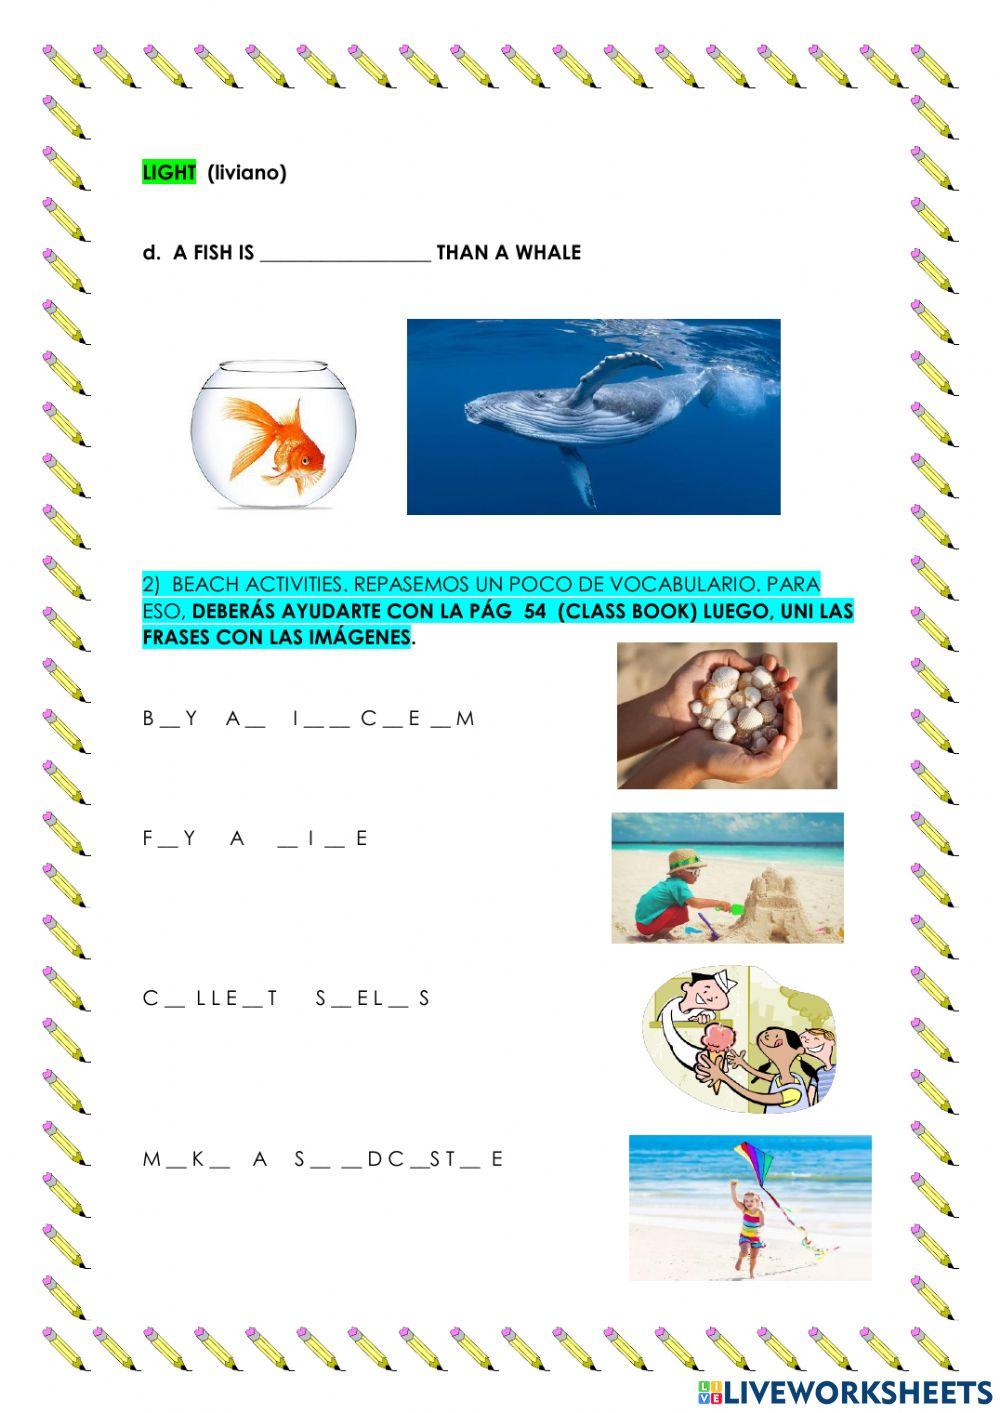 Comparatives and Superlatives, beach activities